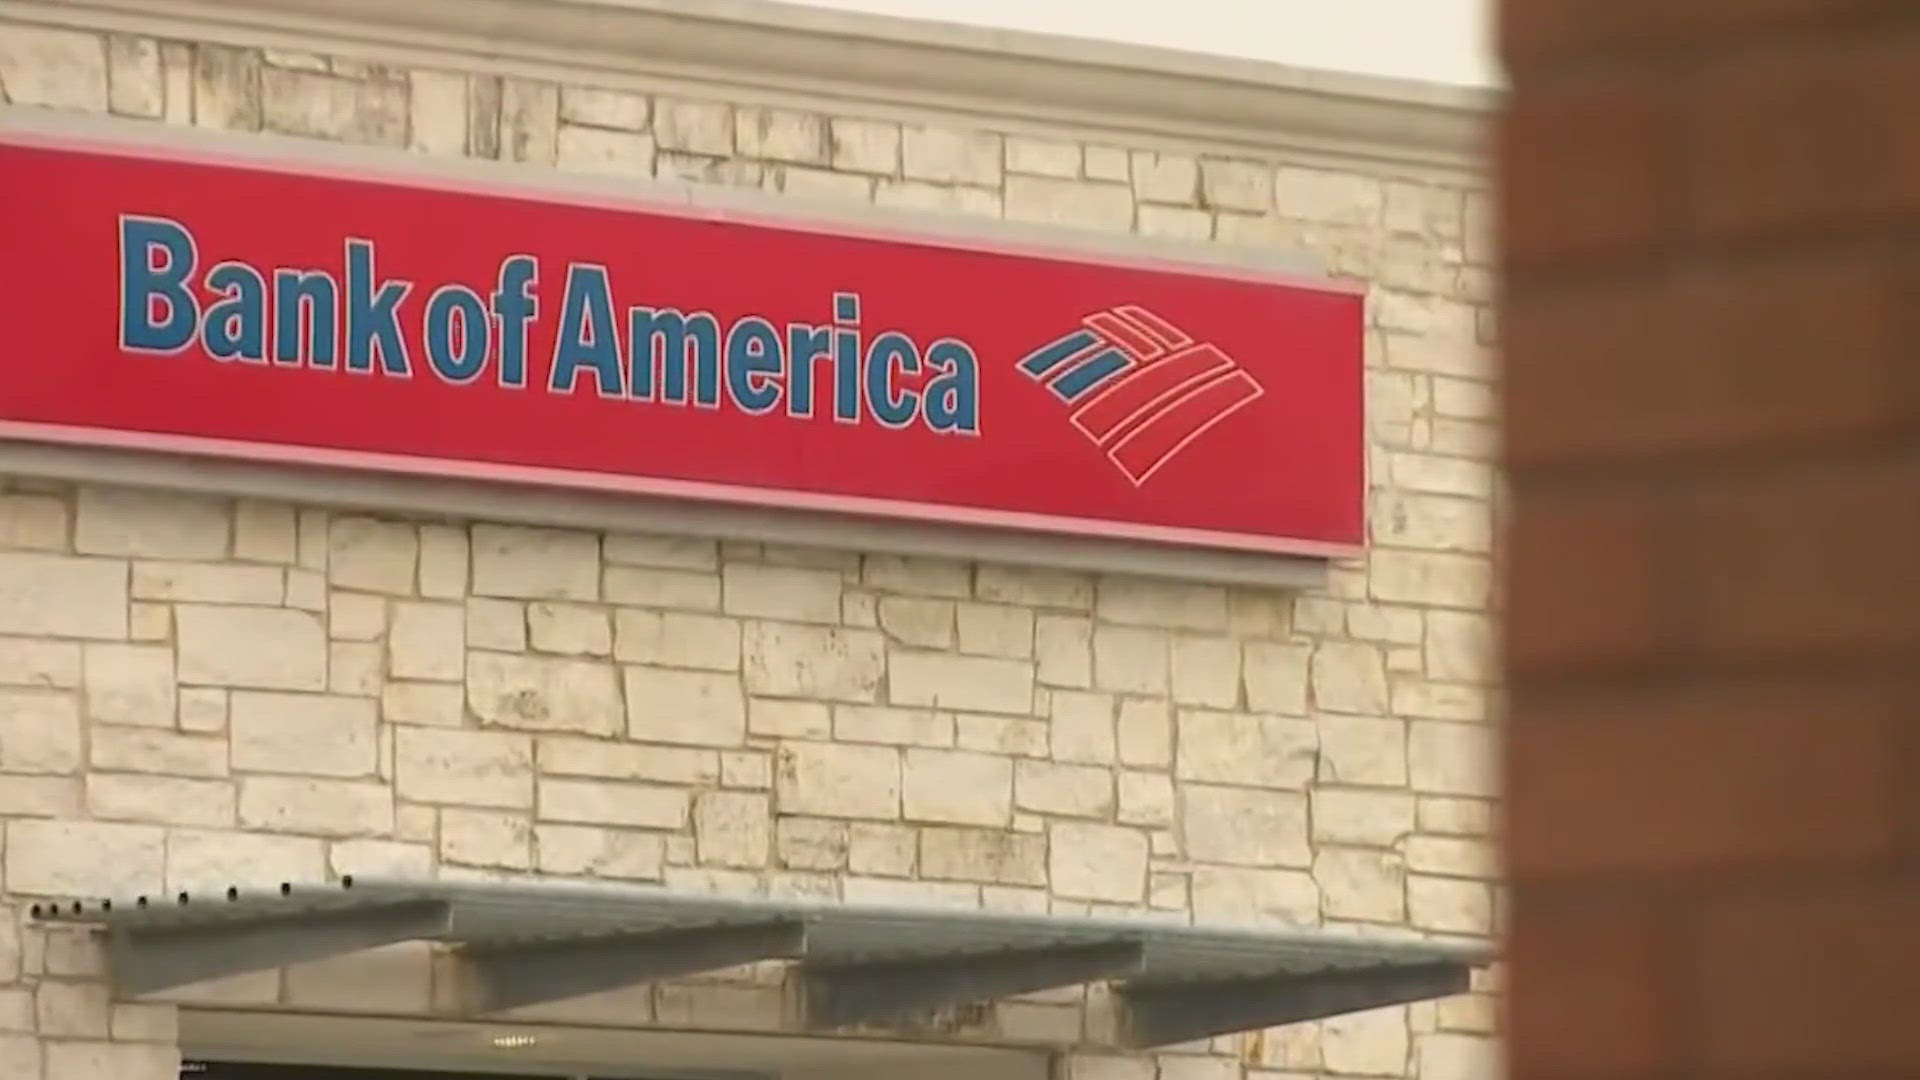 The city of Dallas hired Bank of America to bring more financial options to Southern Dallas.